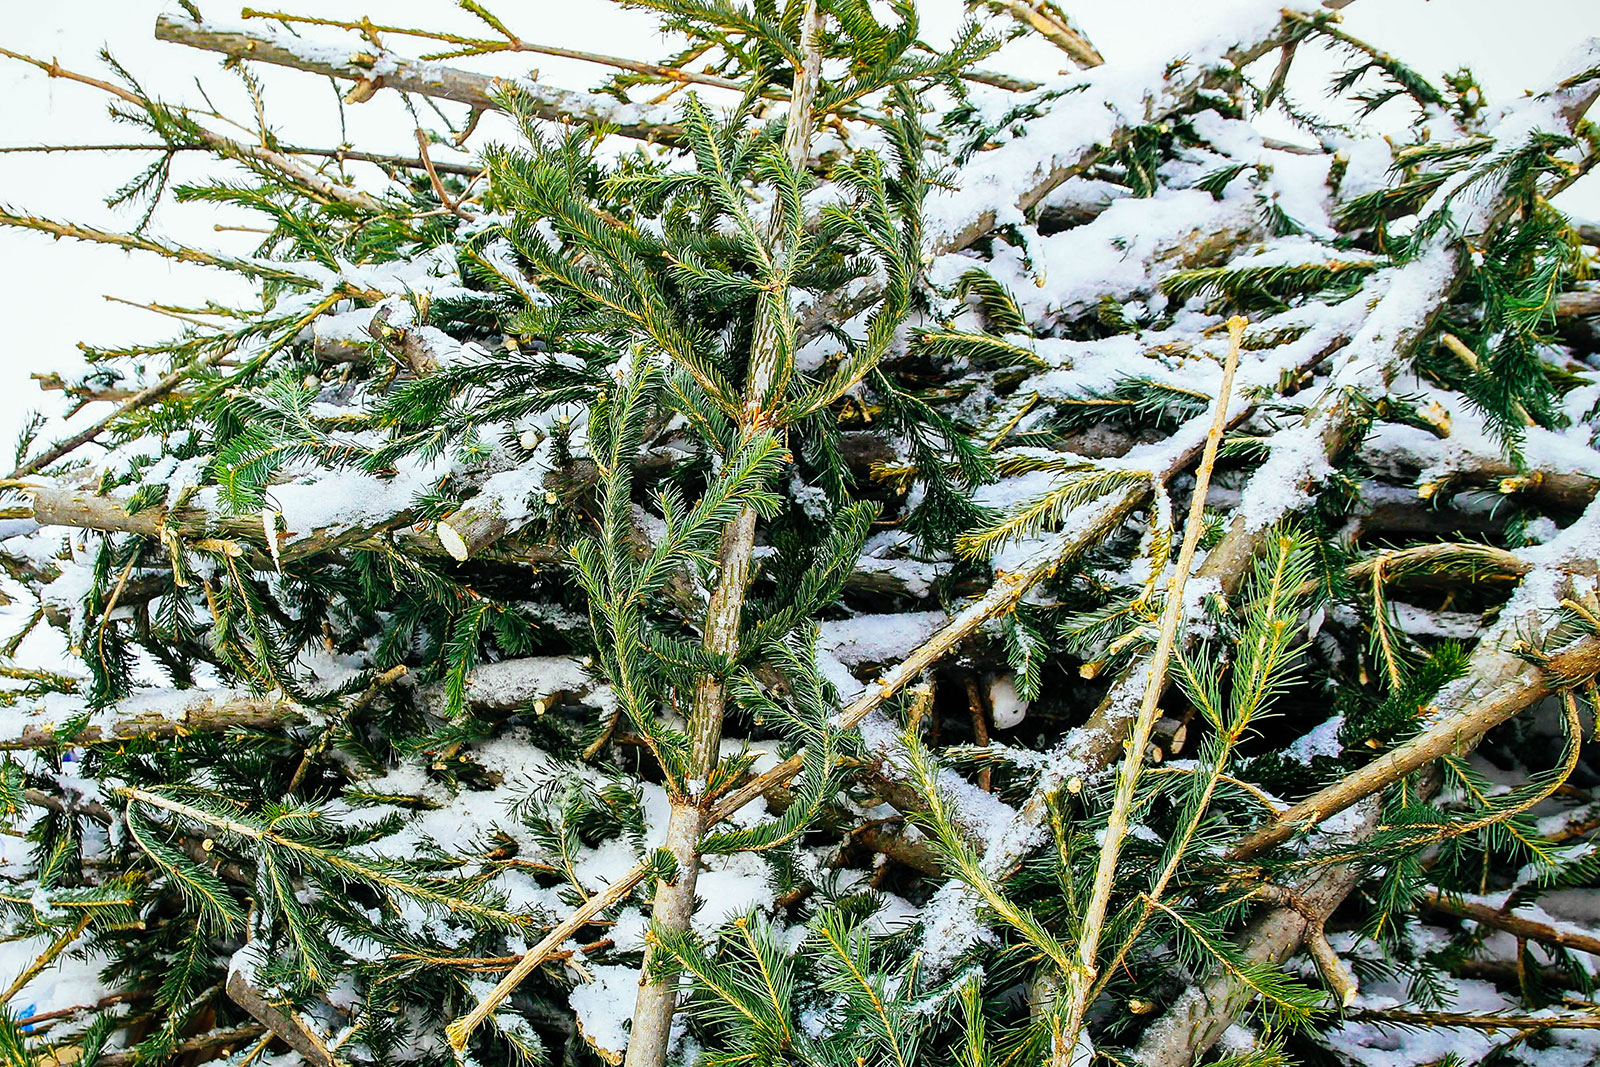 Cut-up boughs from an old Christmas tree sitting in the snow